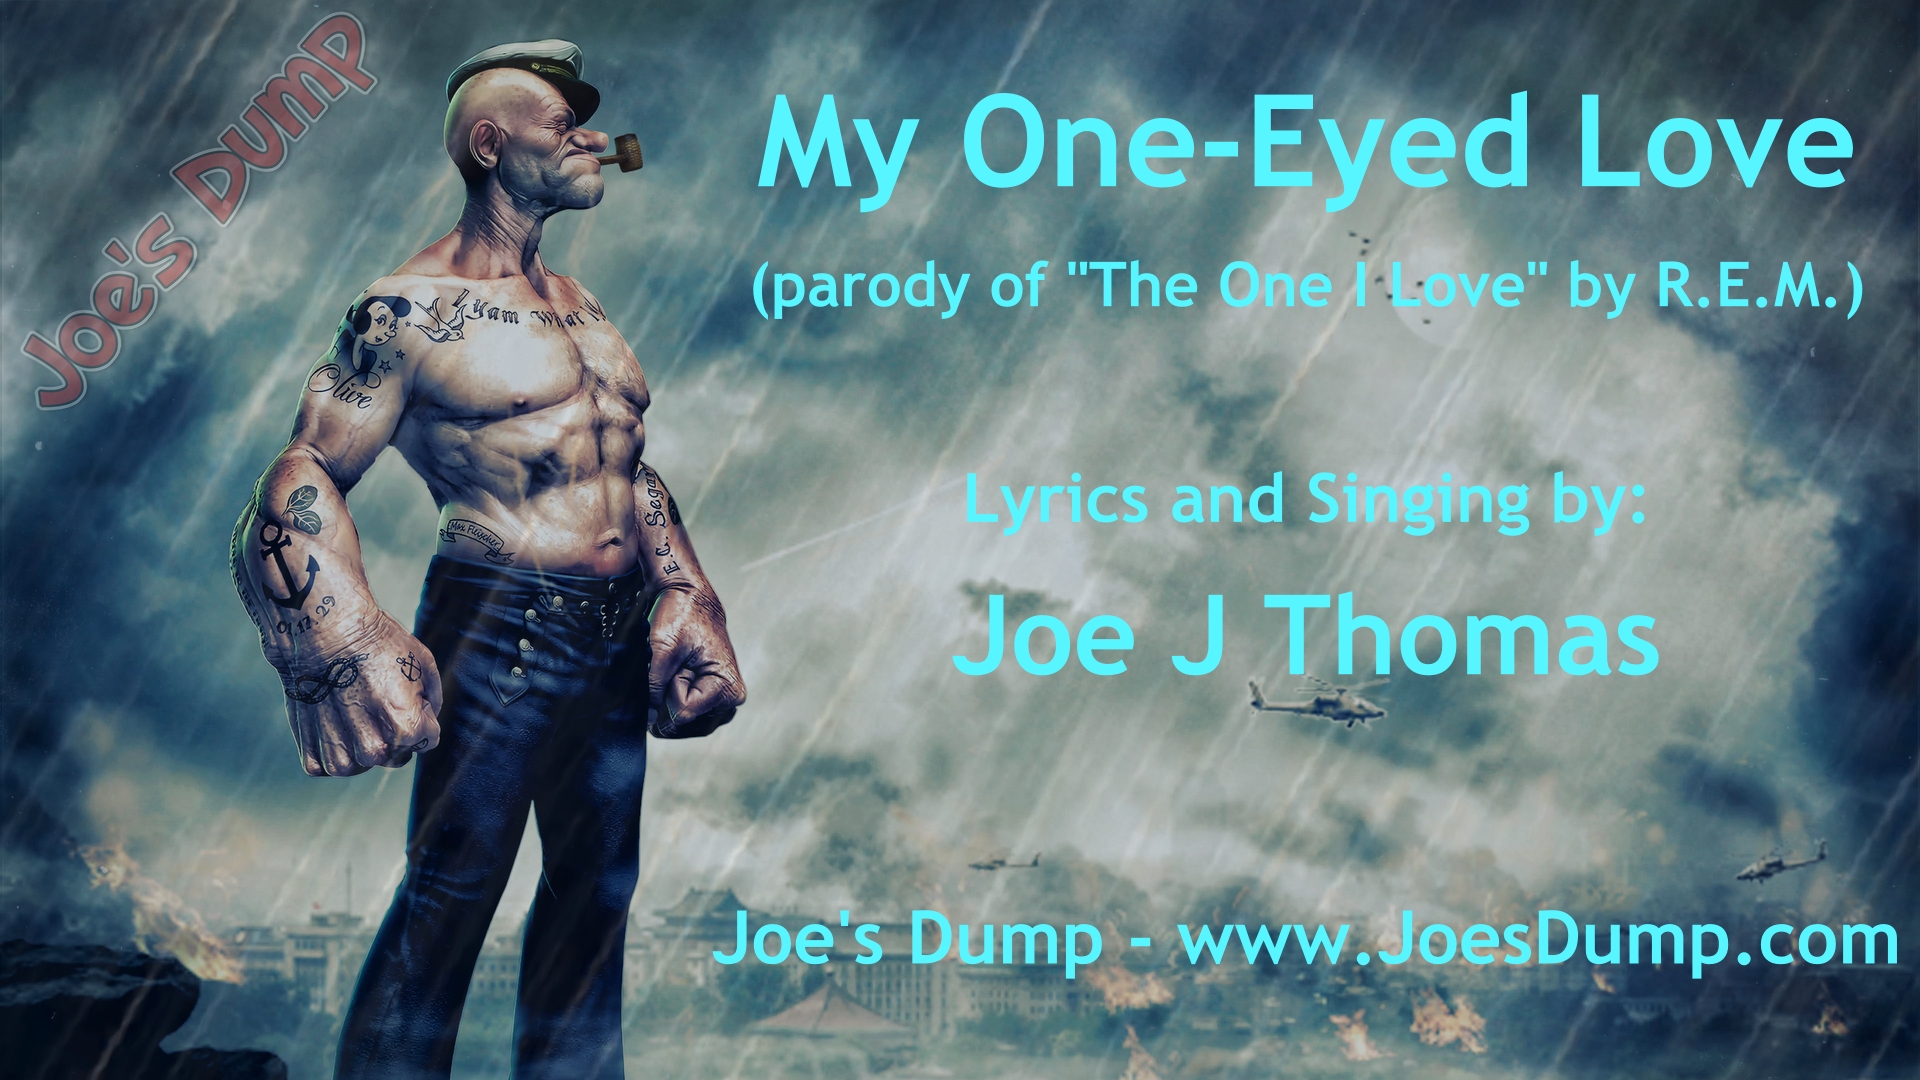 My One-Eyed Love (parody of "The One I Love" by R.E.M.)